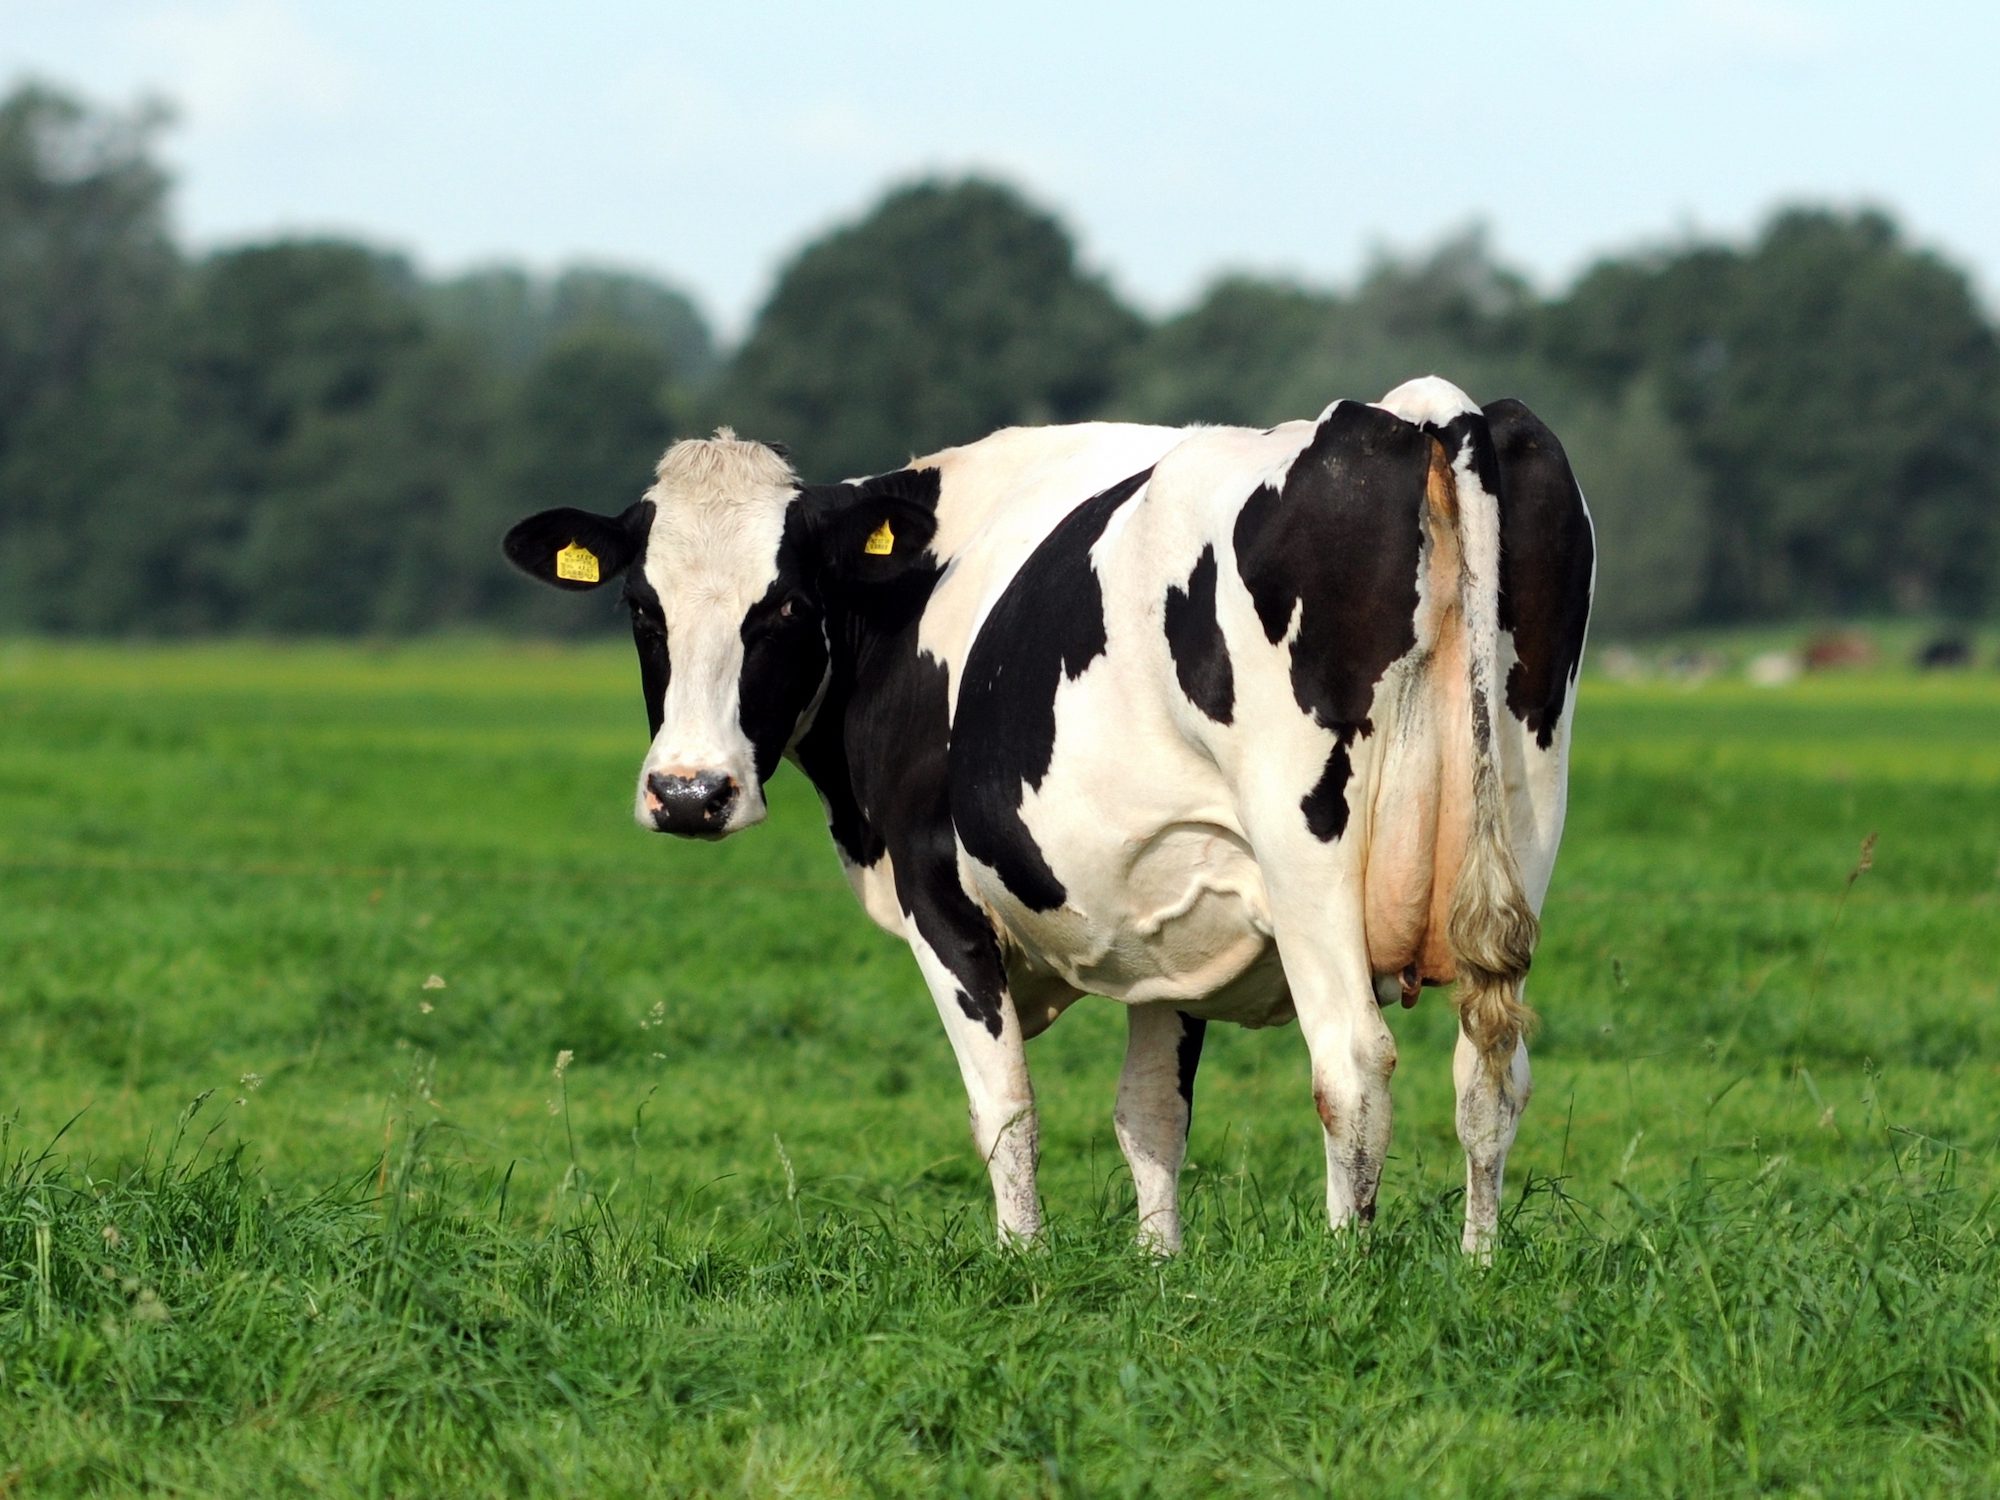 MOL Looks to Cow Manure to Help Reduce CO2 Emissions from Shipping